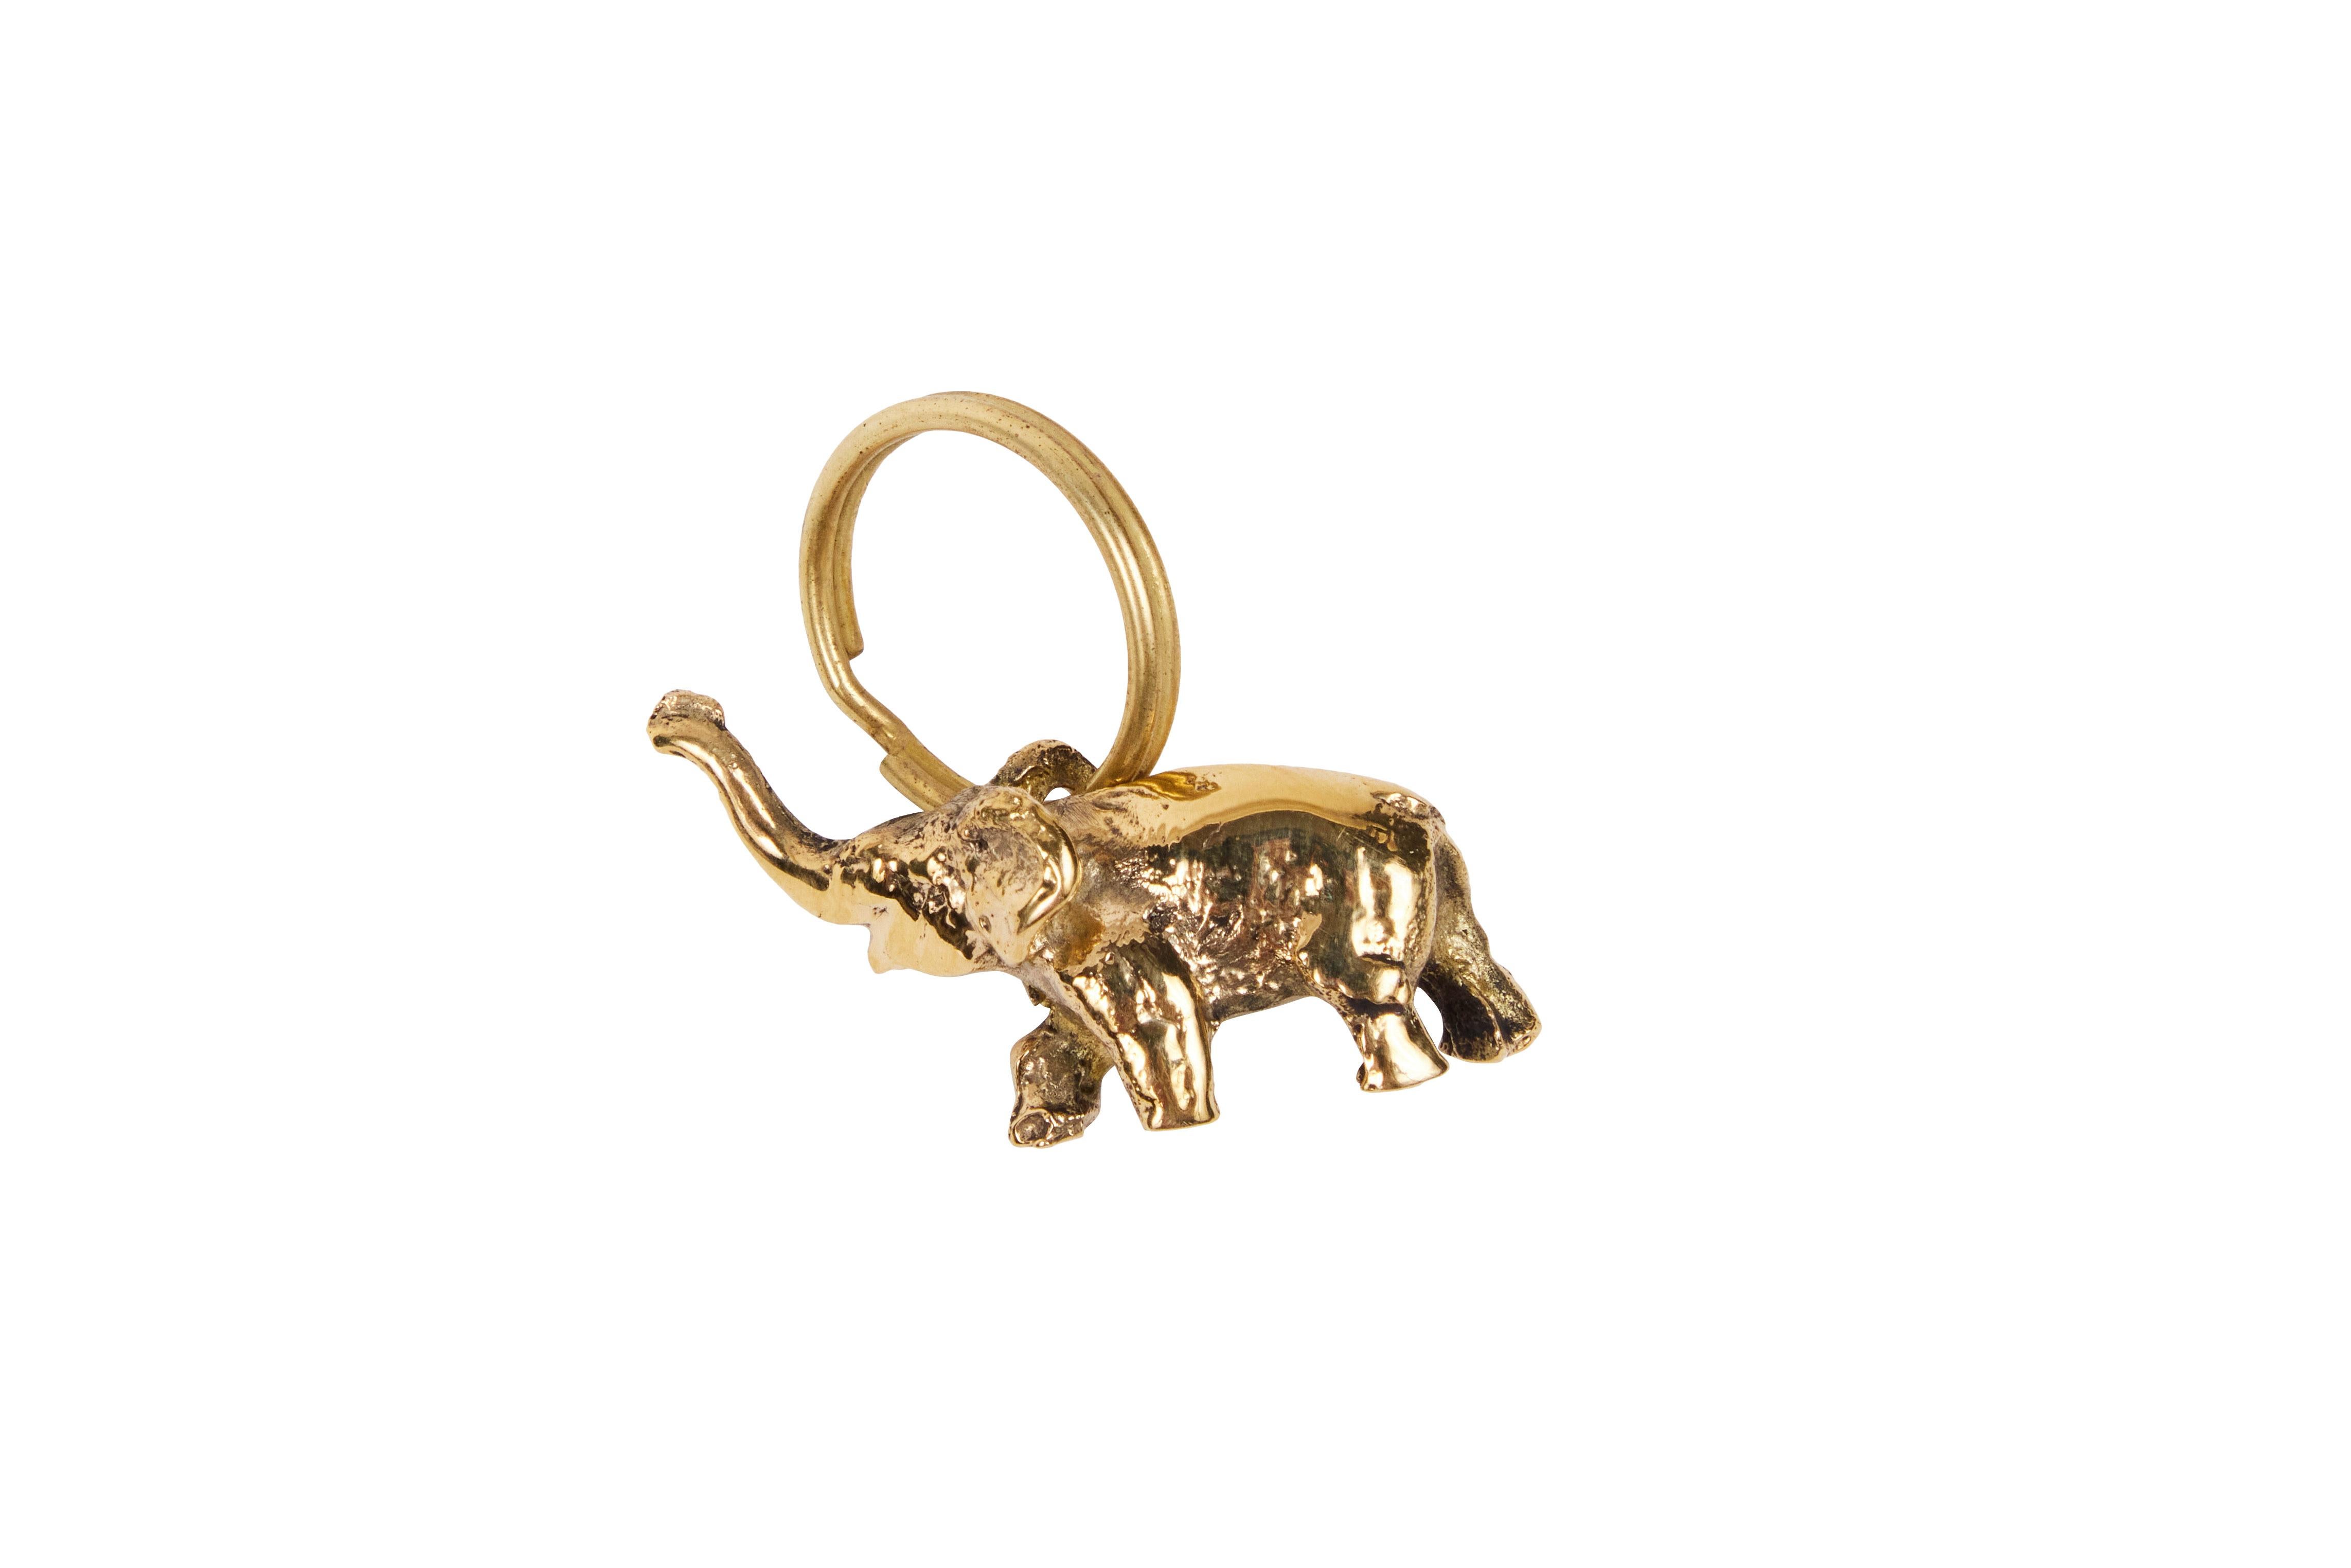 Carl Auböck model #5607 'Elephant' brass figurine keyring. Designed in the 1950s, this incredibly refined and sculptural object is hand fabricated in polished brass. 

Price is per item. One in stock ready to ship. Available in unlimited quantities.